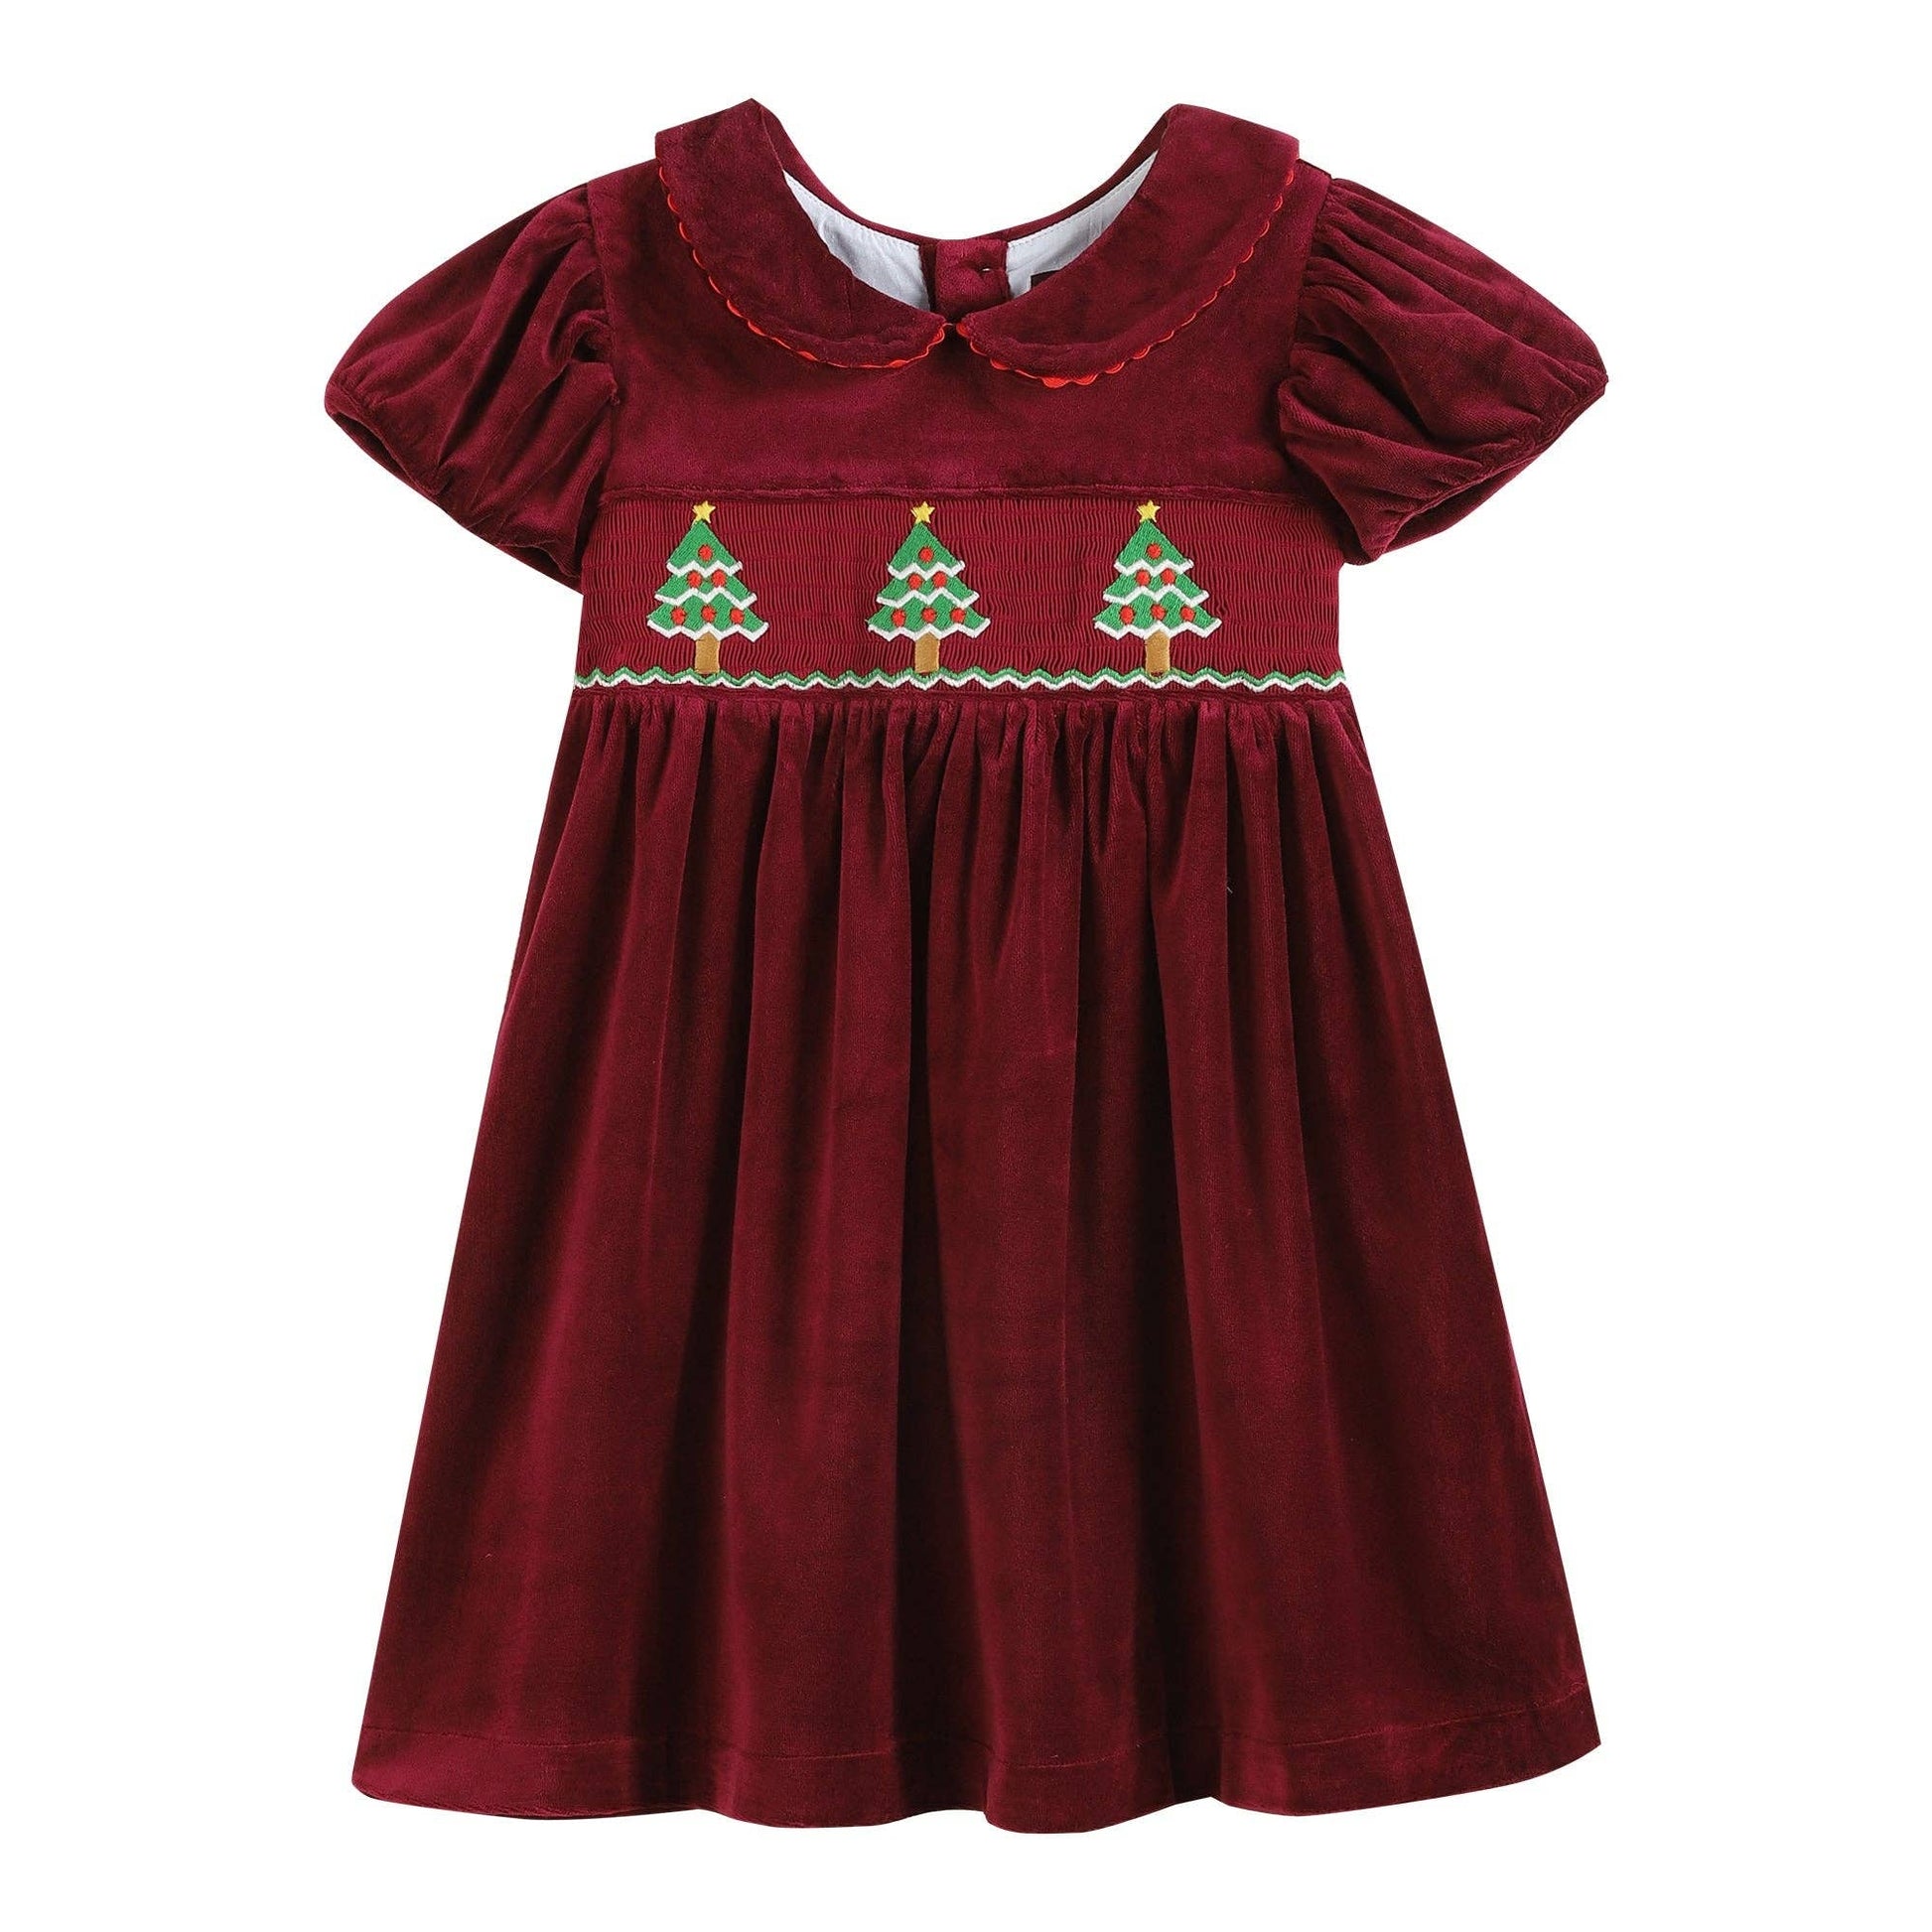 Maroon velvet Christmas tree smocked dress from Lil Cactus has been replaced with the Red Velour Christmas Tree Smocked Dress: 12-18M from Lil Cactus.